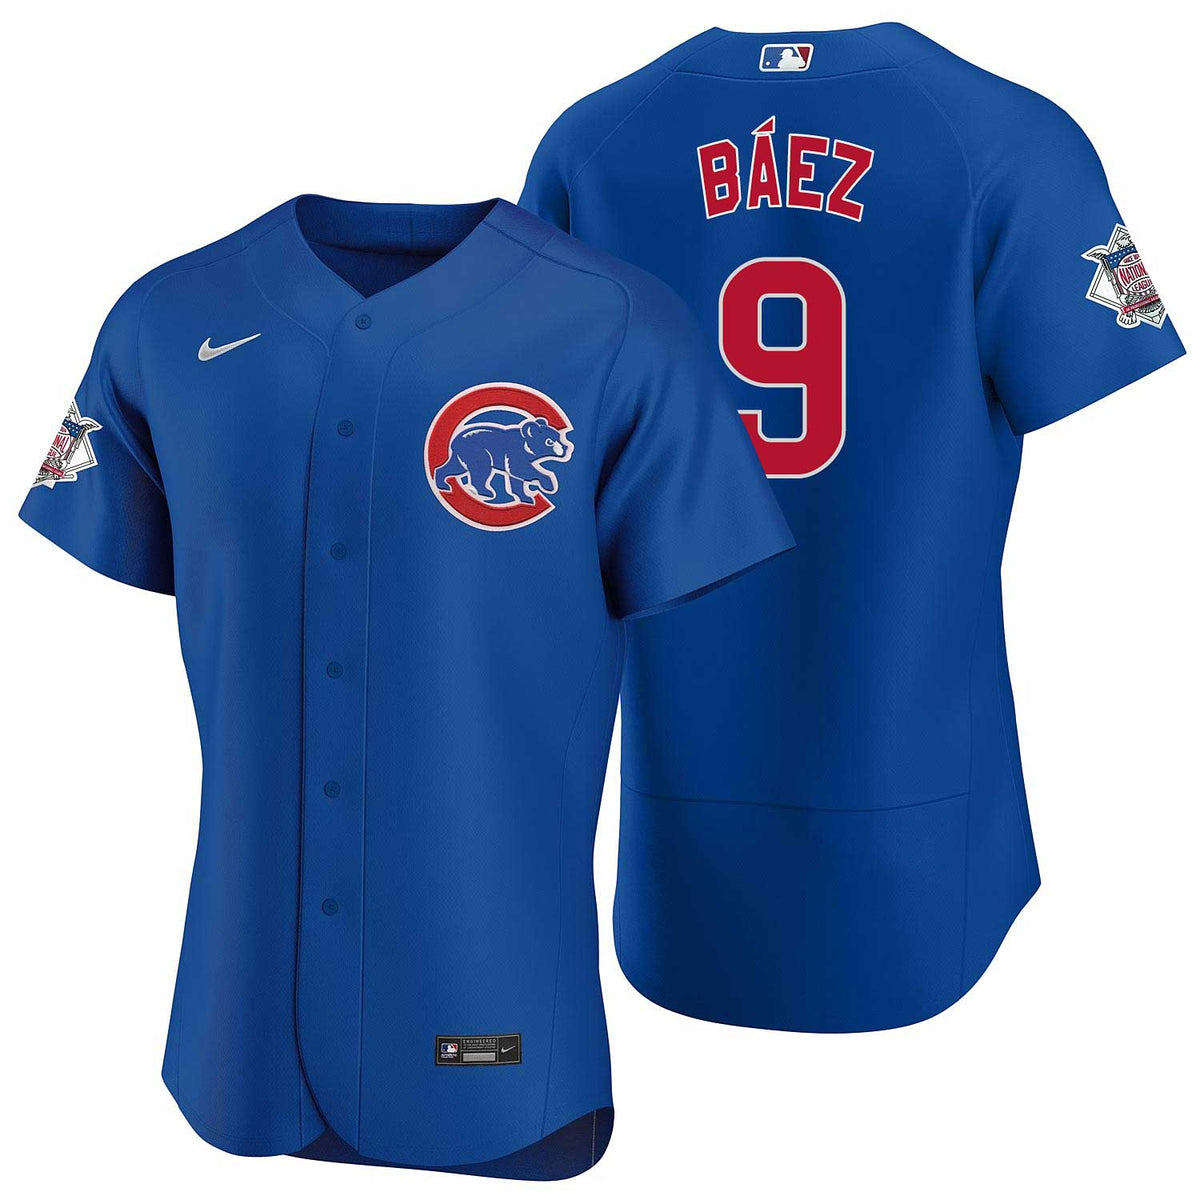 Javier Baez Chicago Cubs Jersey Number Kit, Authentic Home Jersey Any Name  or Number Available at 's Sports Collectibles Store